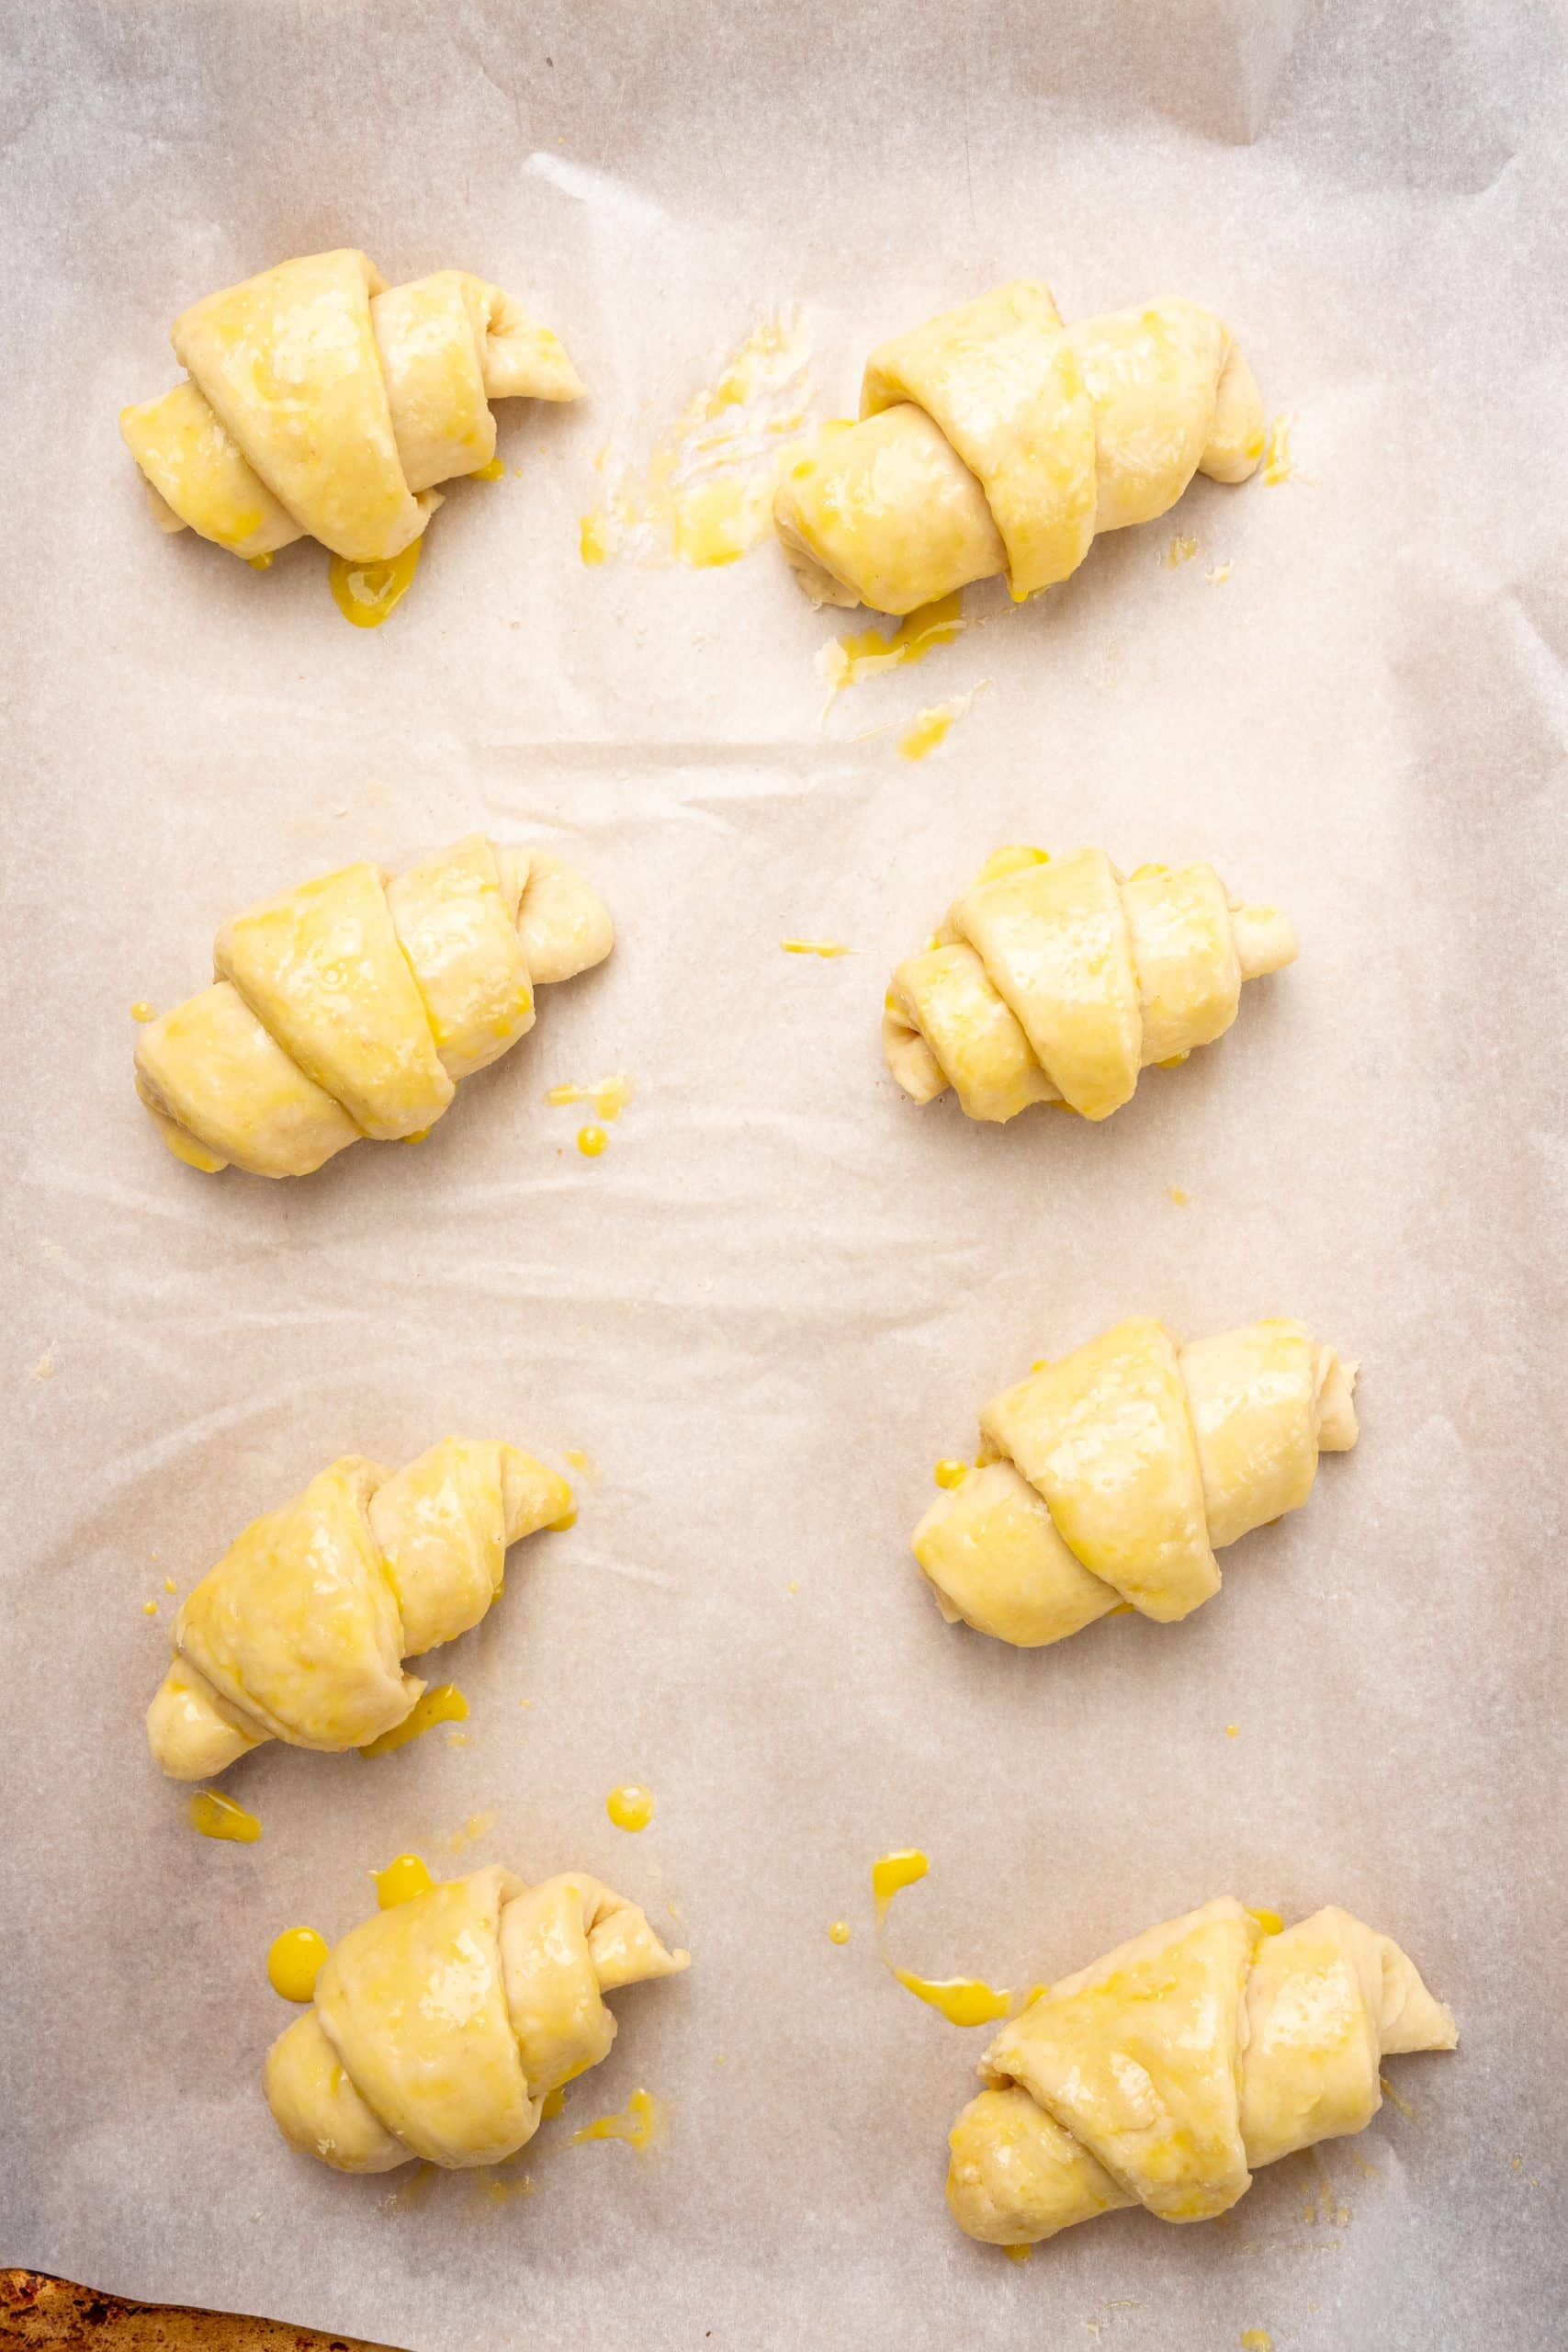 unbaked croissant rolls on a parchment paper lined baking sheet